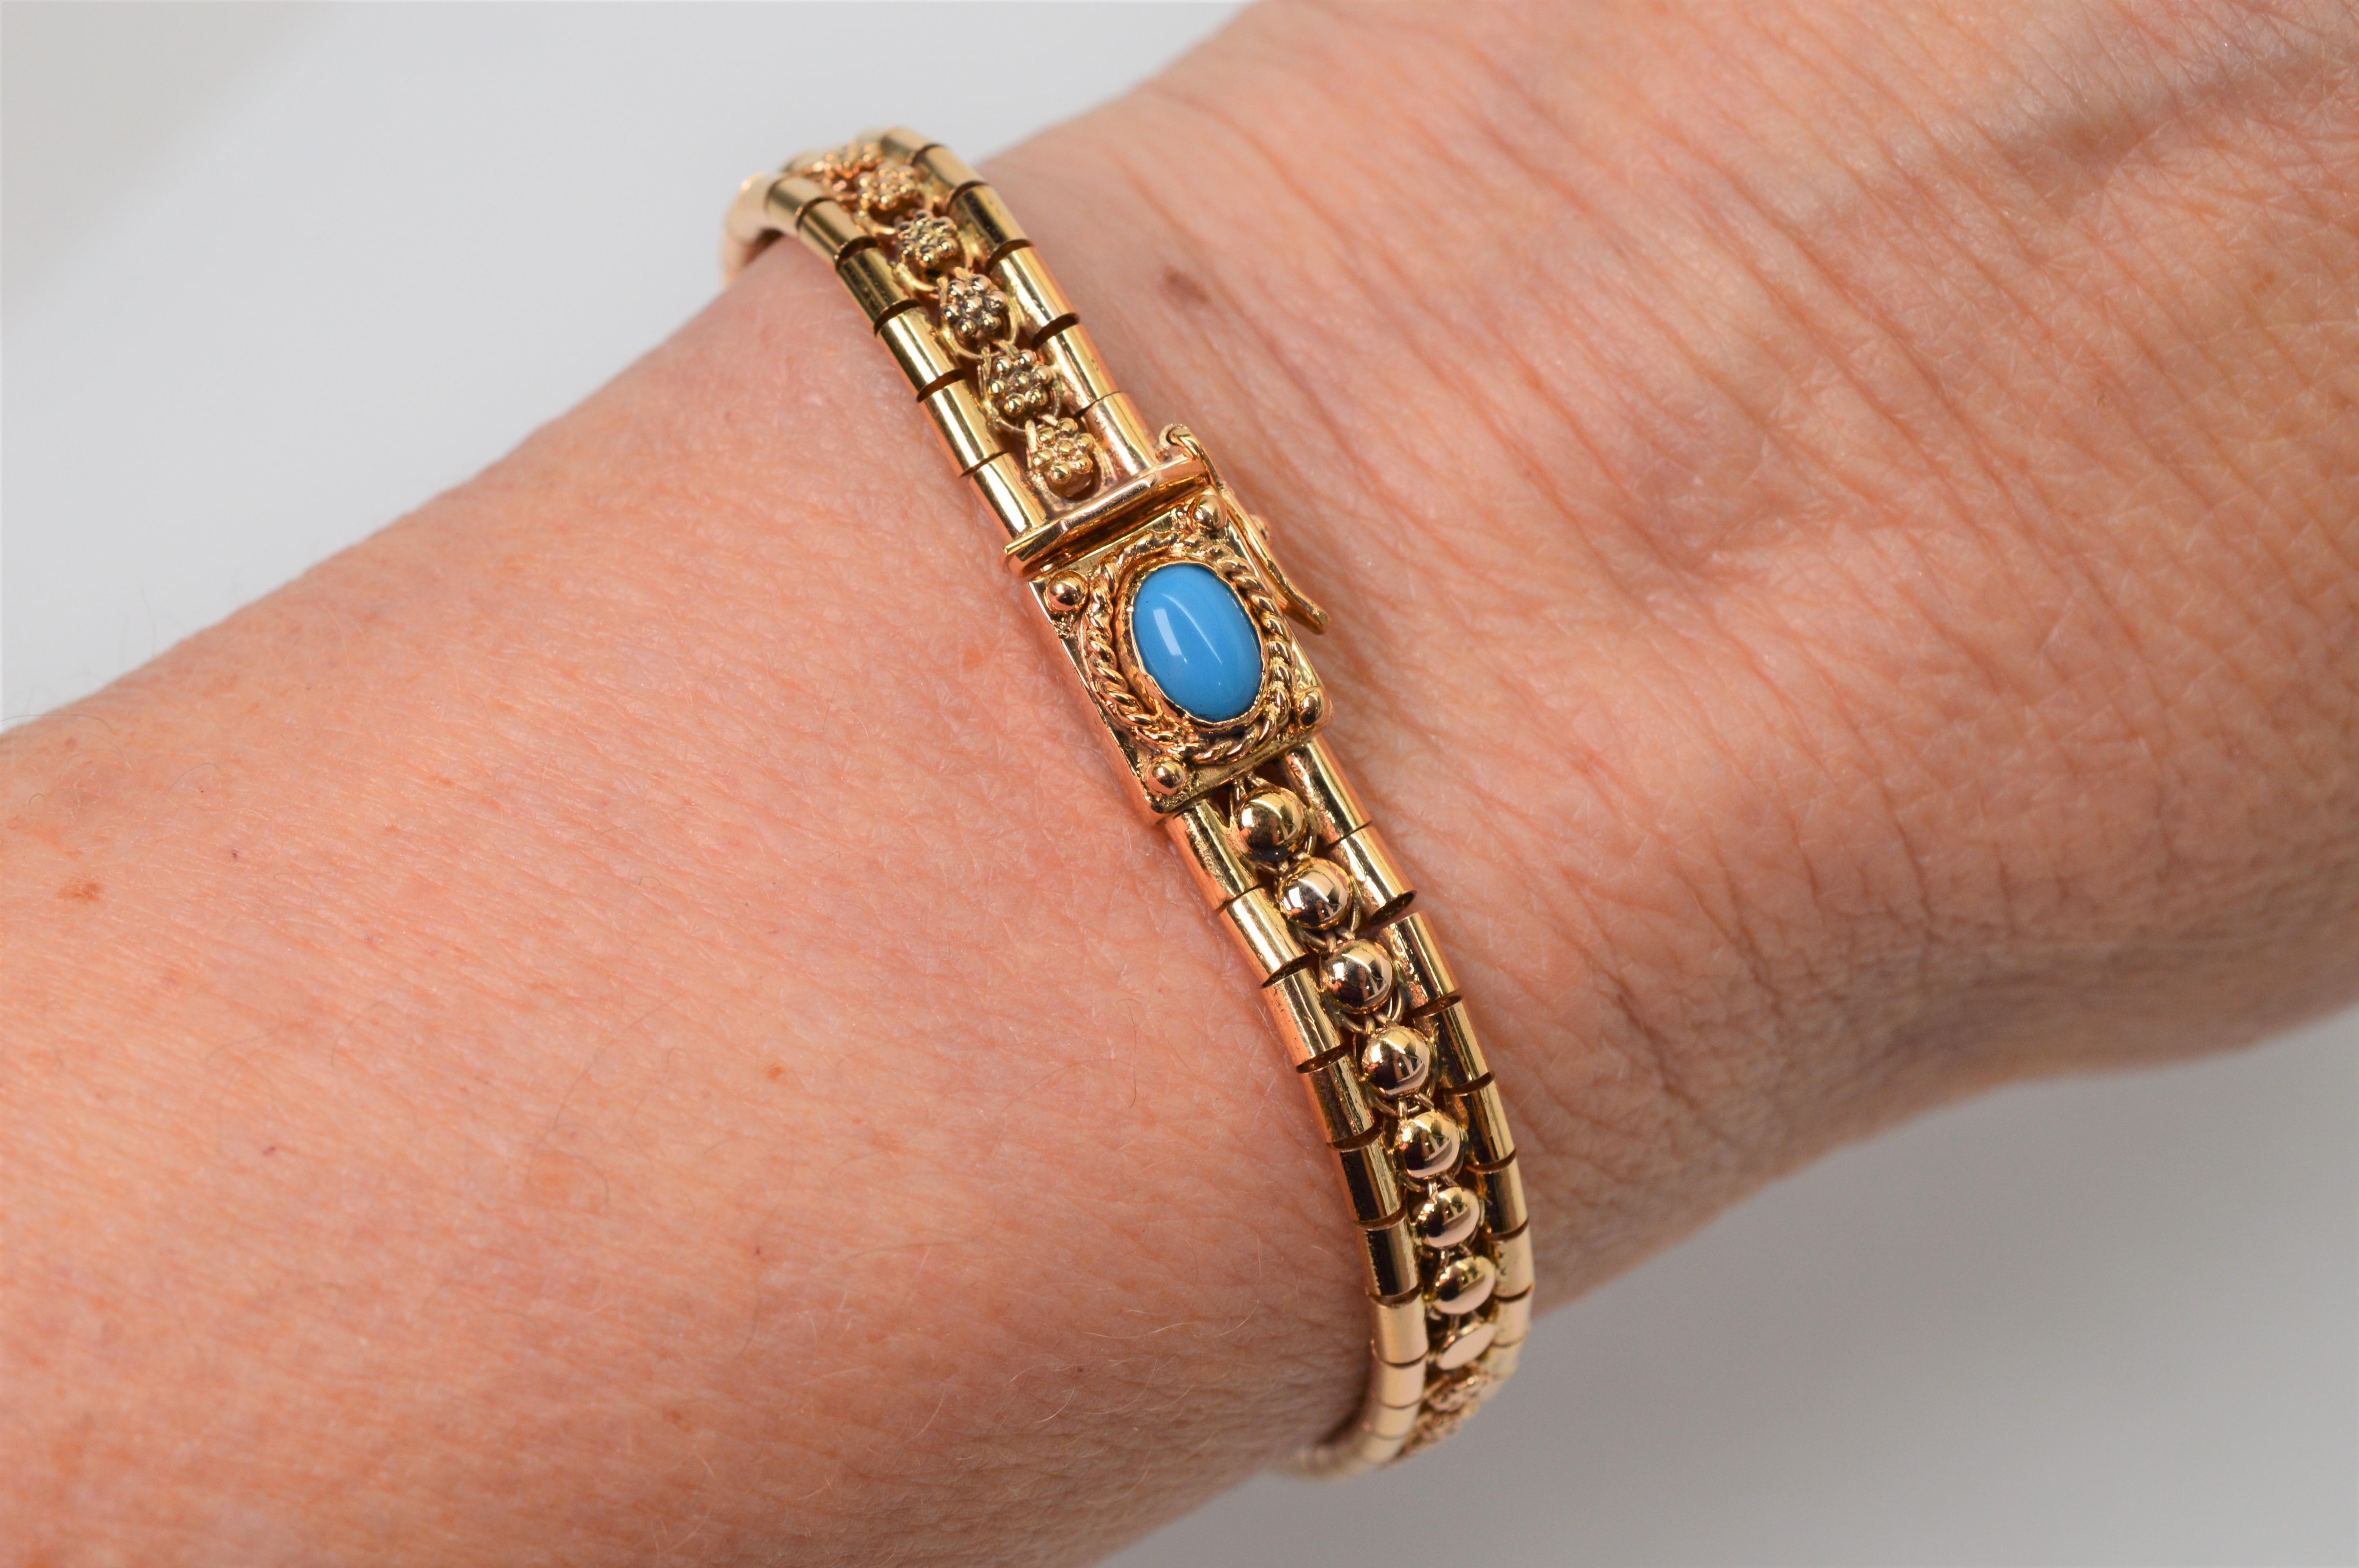 Italian made in eighteen karat 18K fine yellow gold, this perfectly understated bracelet showcases a vivid blue turquoise cabochon that is bezel set and framed with a gold rope on it's buckle detail. 
The elegant bracelet measures 7.5 inches in